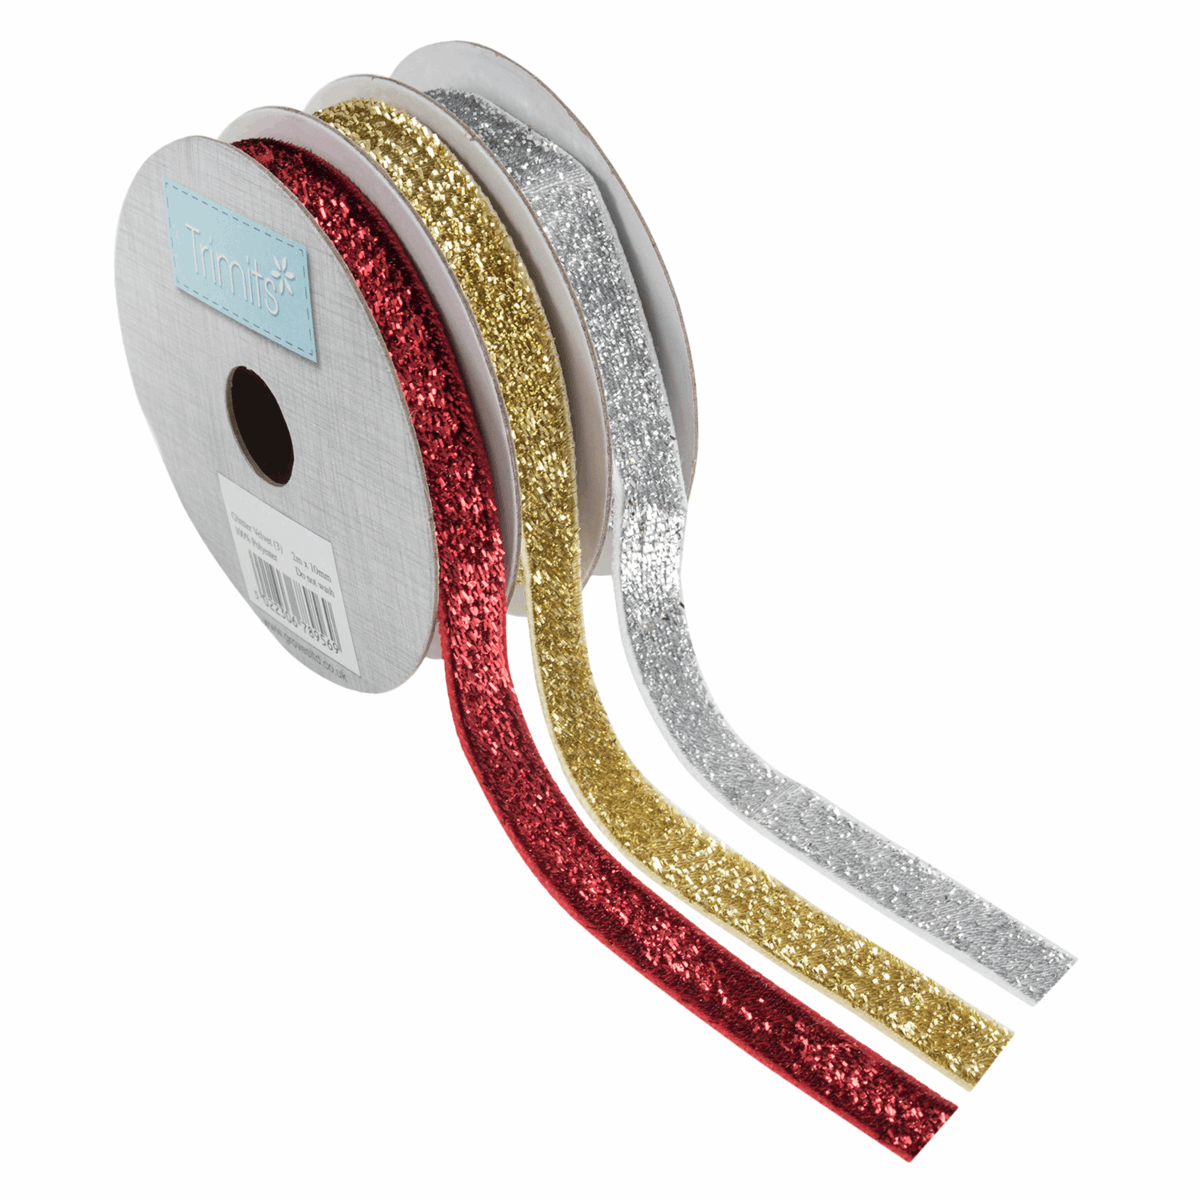 Christmas Sparkly Ribbon - 2m x 10mm - Red Silver Gold (3 Pack)